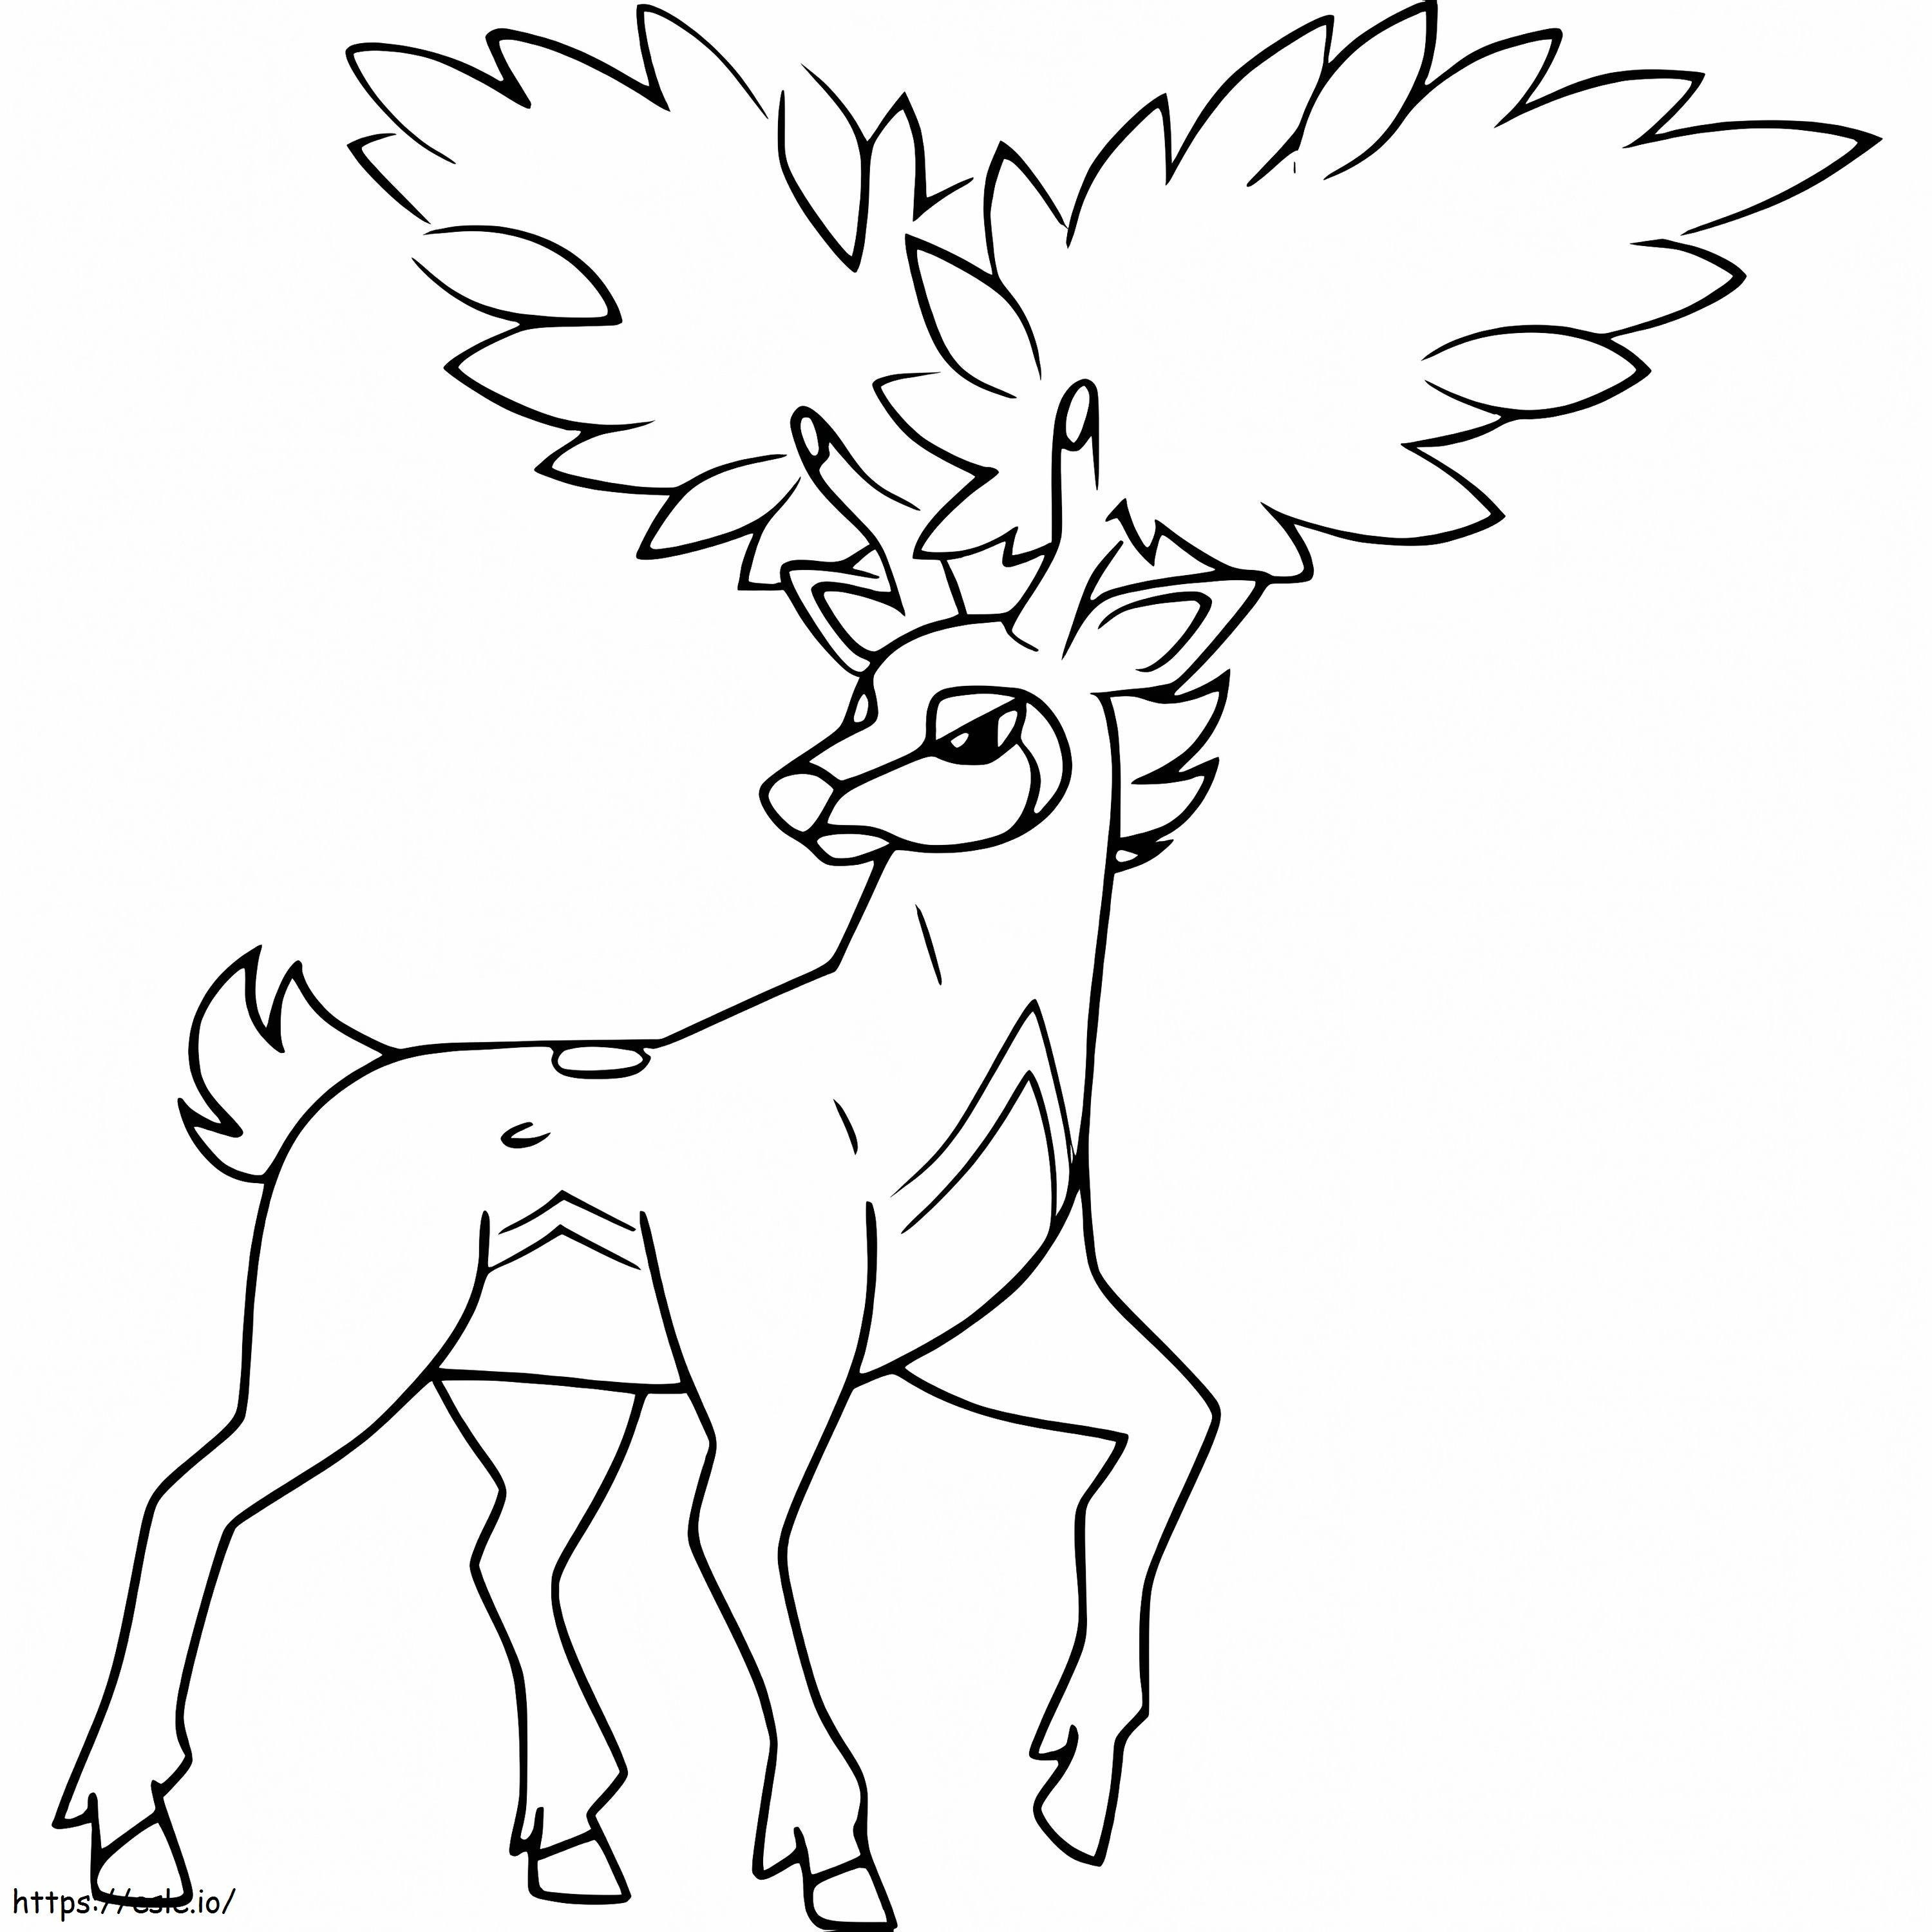 Sawsbuck Summer Form coloring page